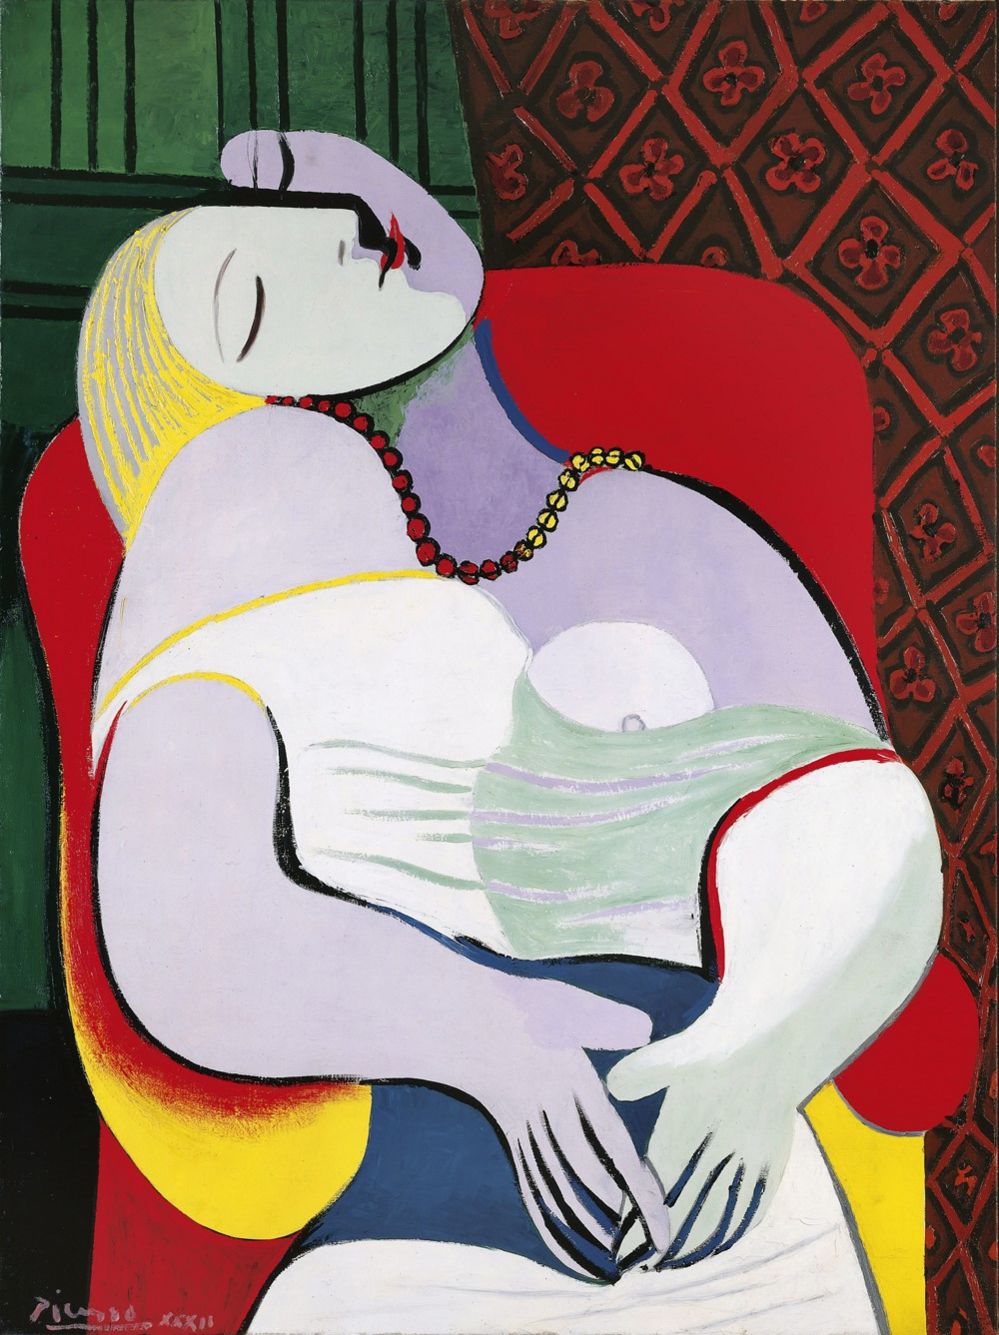 Picasso's painting Le Rêve (1932) of his mistress, Marie-Thérèse Walter